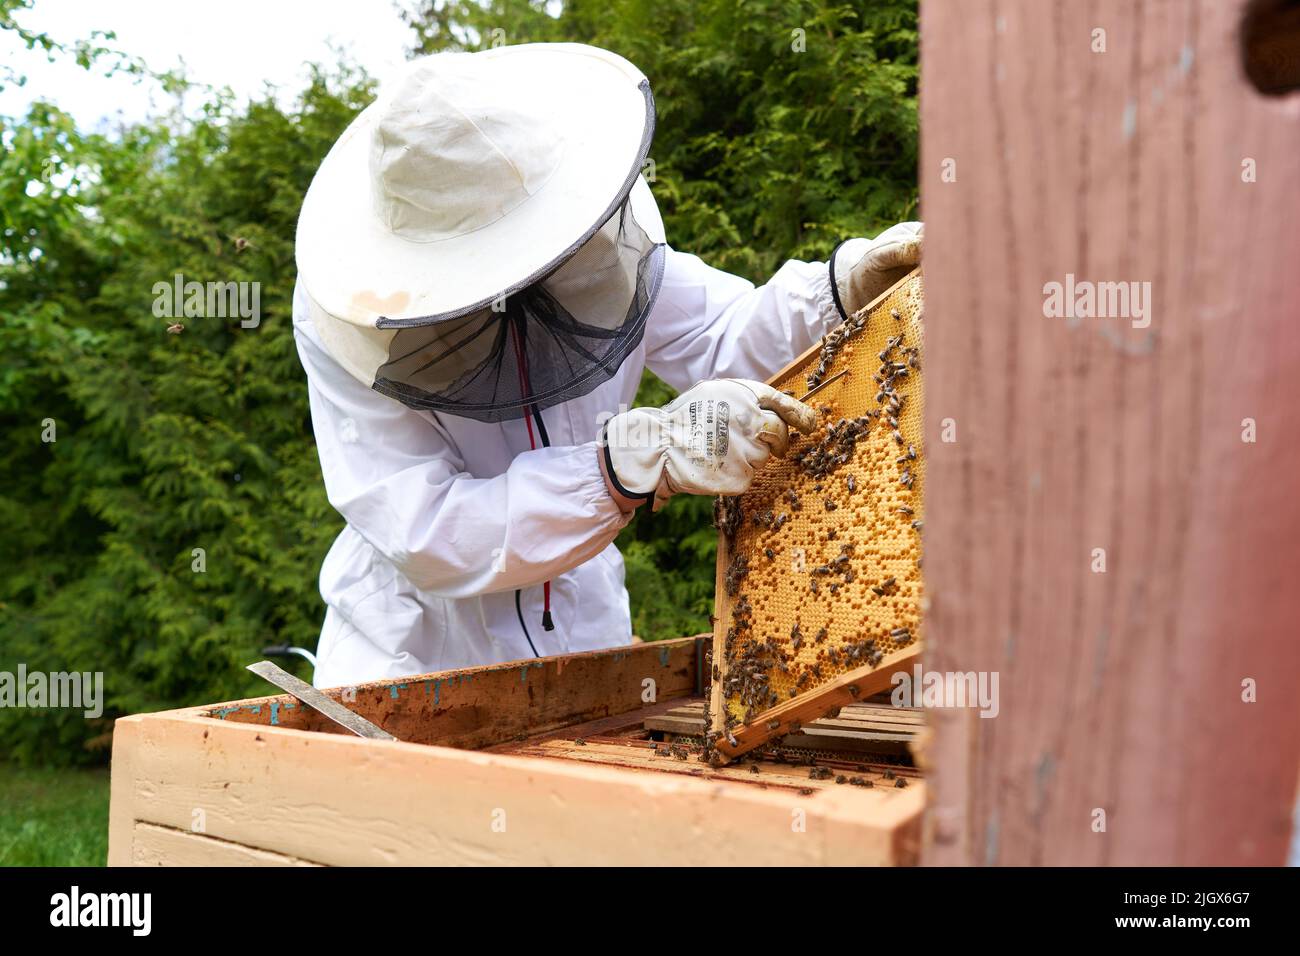 Man in protective suit taking honey from a panel of an artificial bee hive Stock Photo